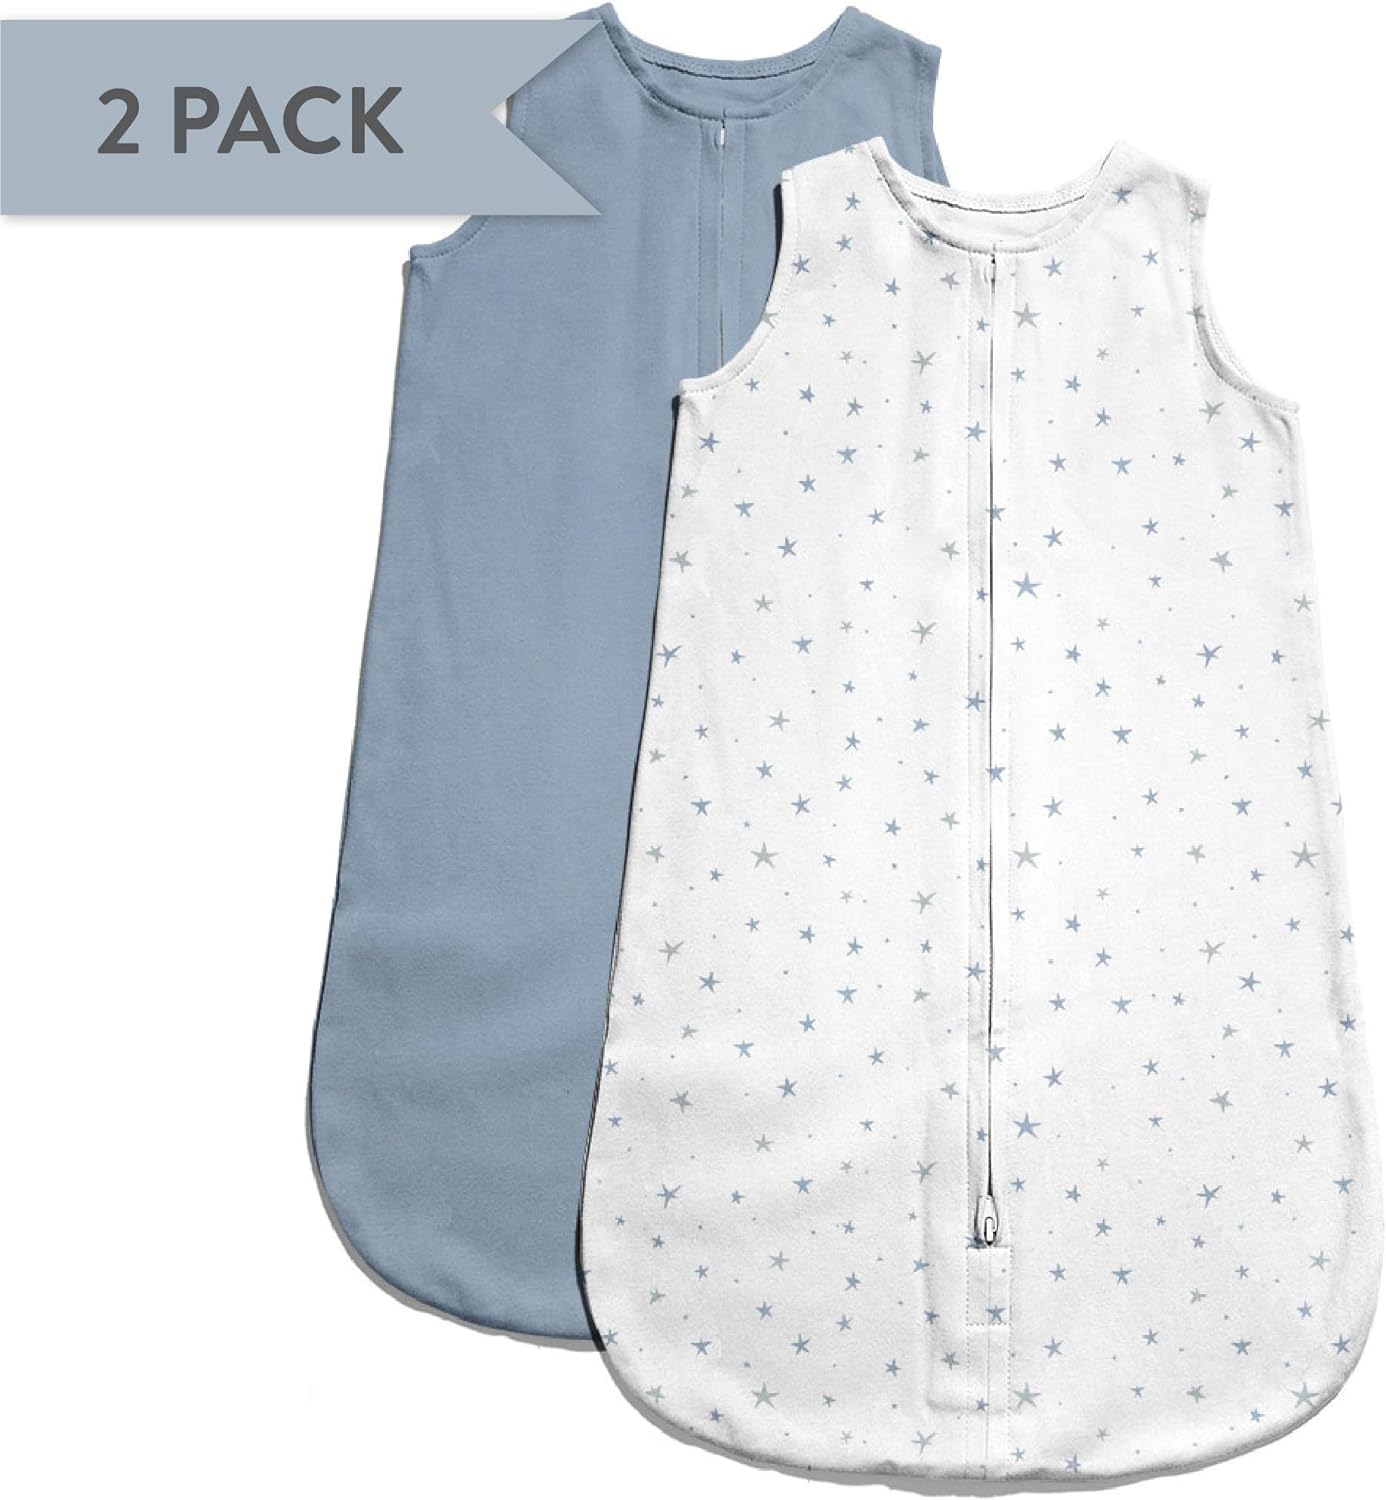 Baby Wearable Blanket - Cotton Sleep Sack 0-3,3-6, 6-12, 12-18 Months - 2 Pack Set for Baby Boy and Girl, Pink, Blue & Grey